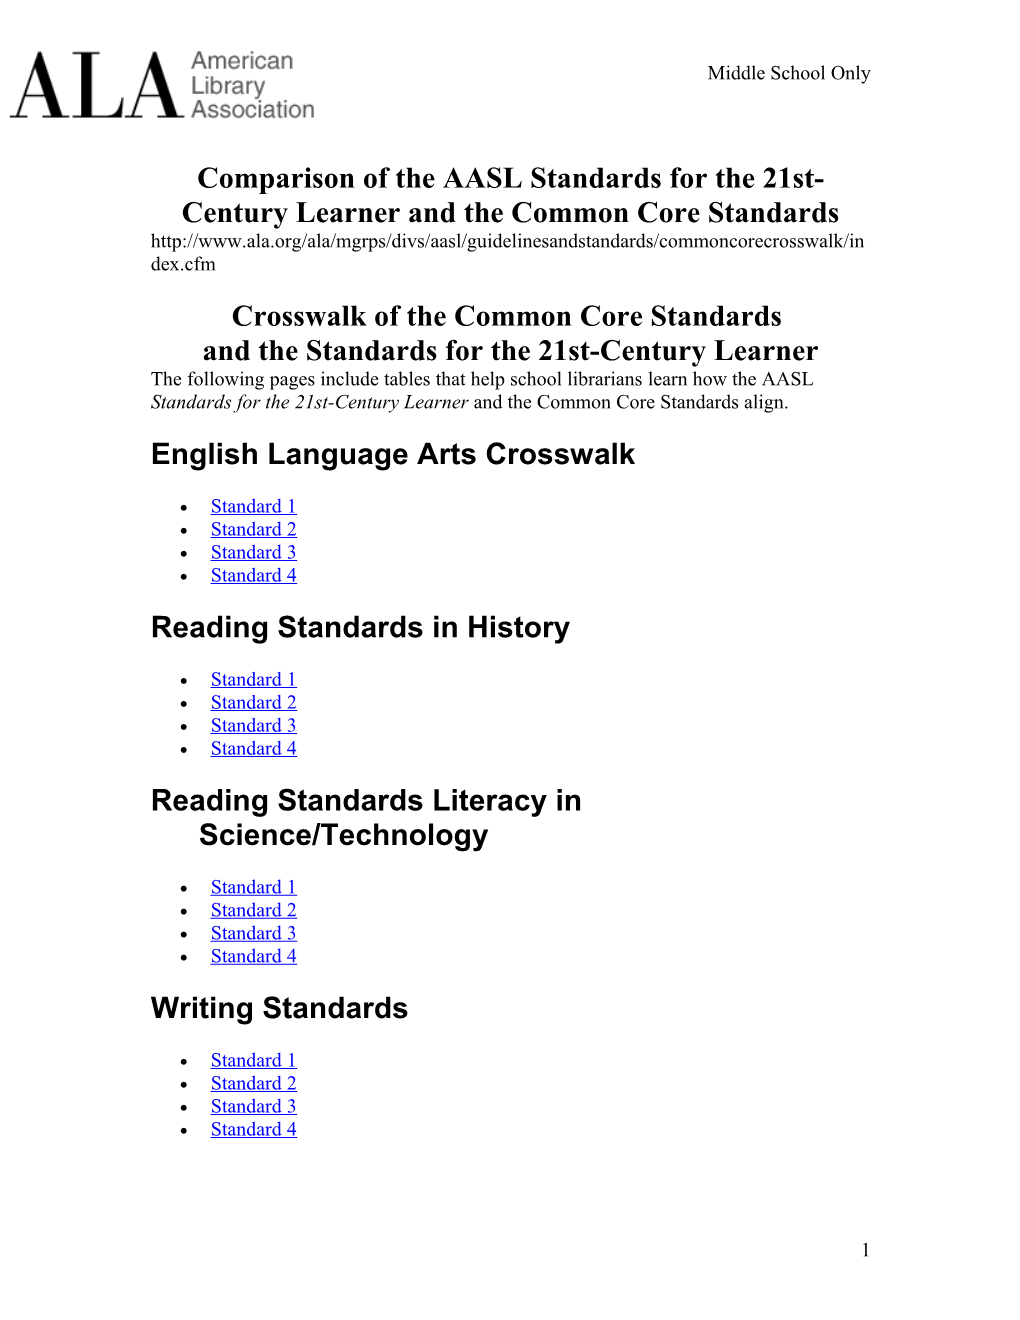 Comparison of the AASL Standards for the 21St-Century Learner and the Common Core Standards